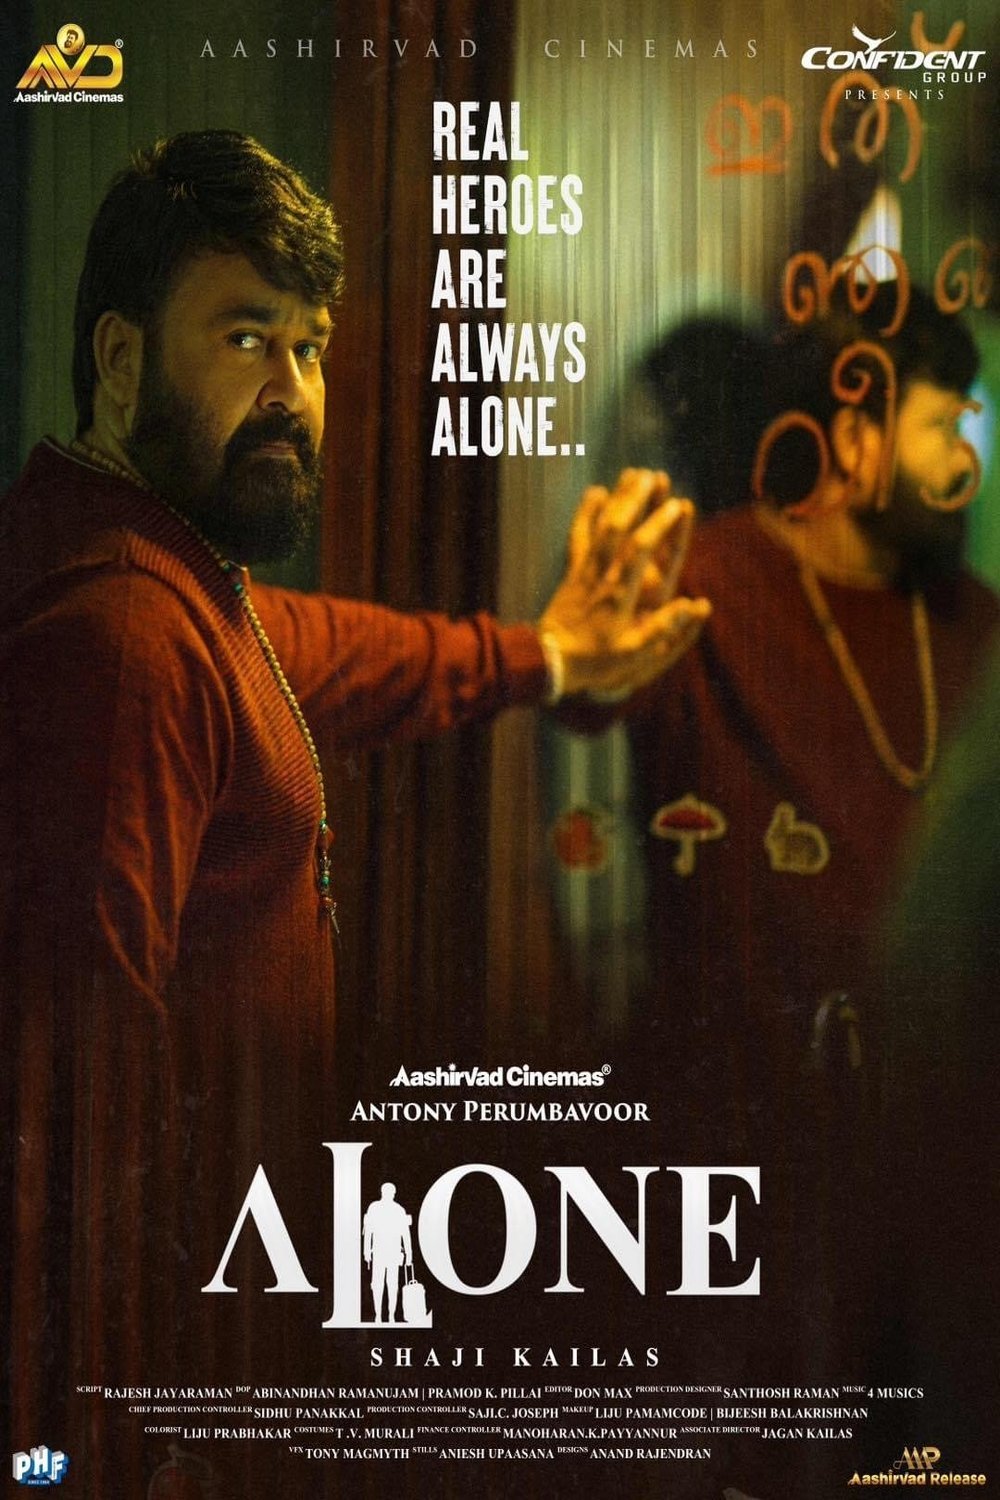 Malayalam poster of the movie Alone